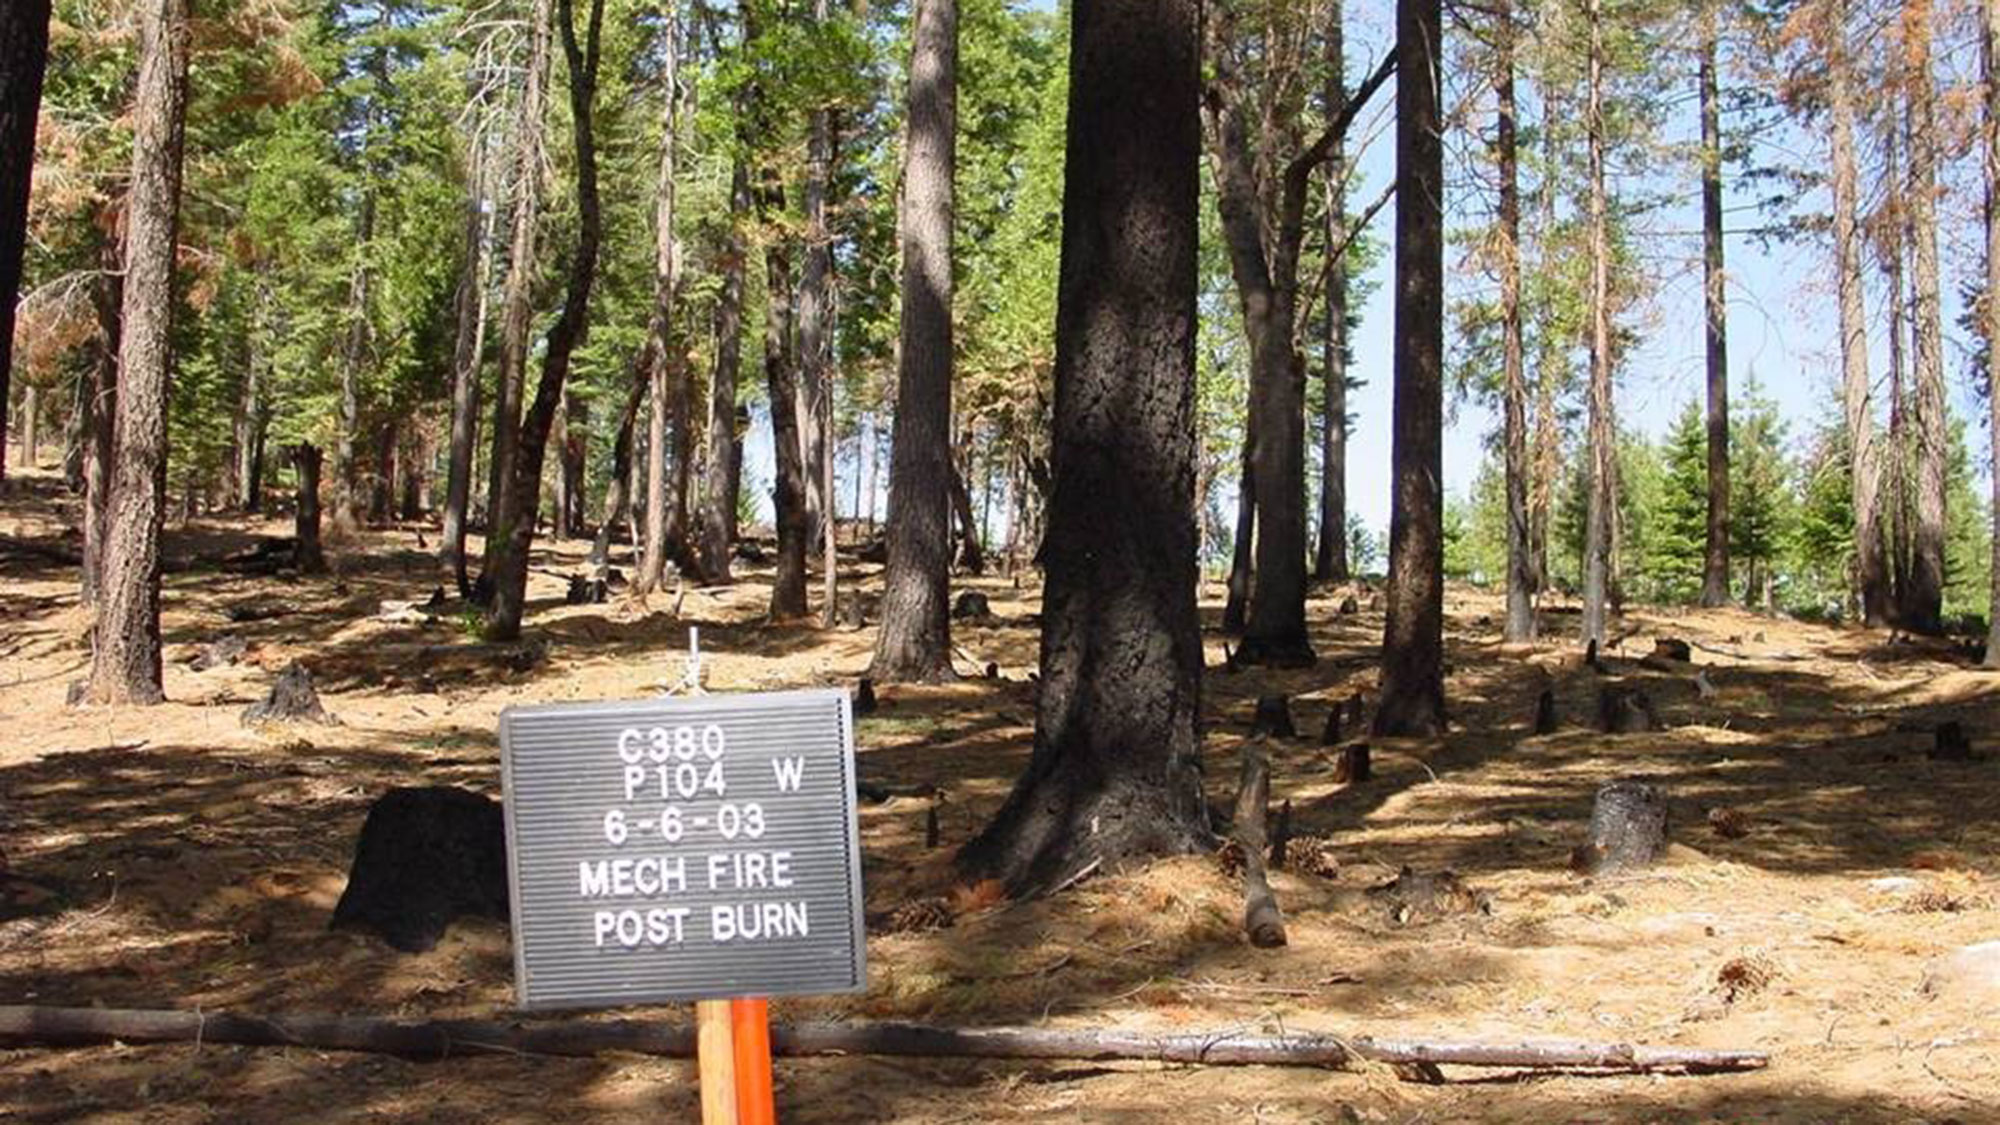 A photo of a section of a conifer forest. The forest floor is clear of dead sticks and debris. Blacked scorch marks extend from the ground up the sides of some of the tree trunks. A placard placed in front of the forest reads “C380, P104, 6-6-03, Mech Fire, Post burn.”